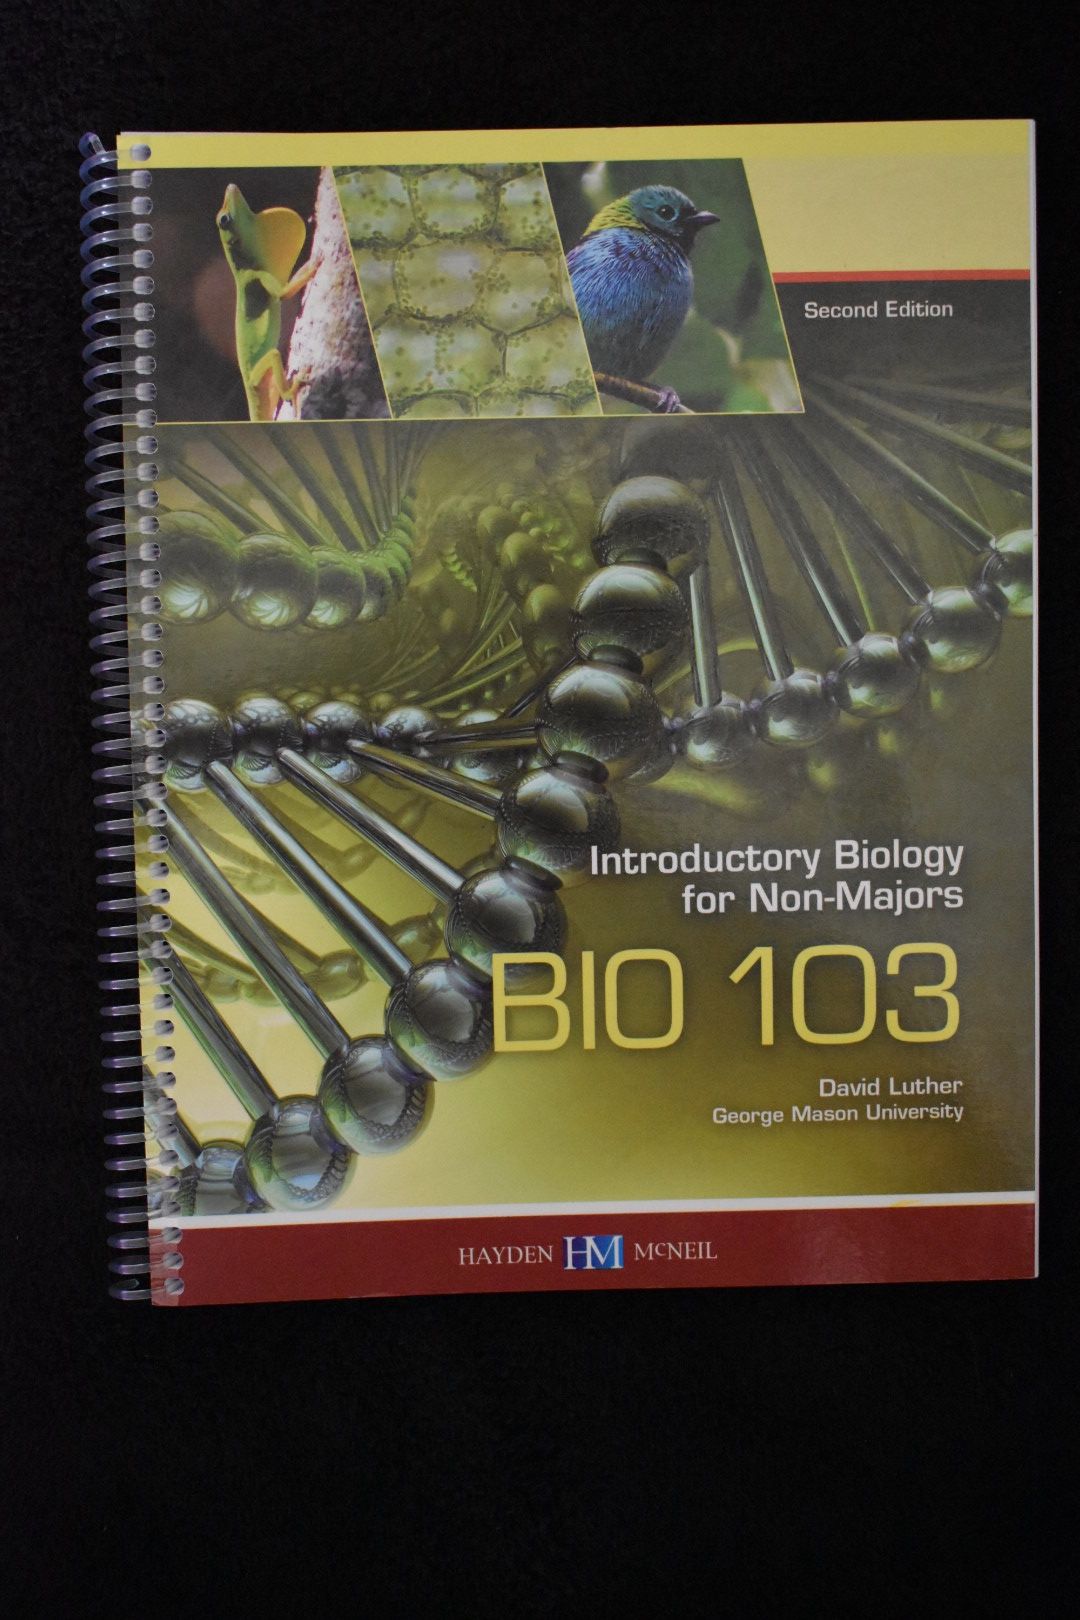 Introductory Biology for Non-Majors BIO 103